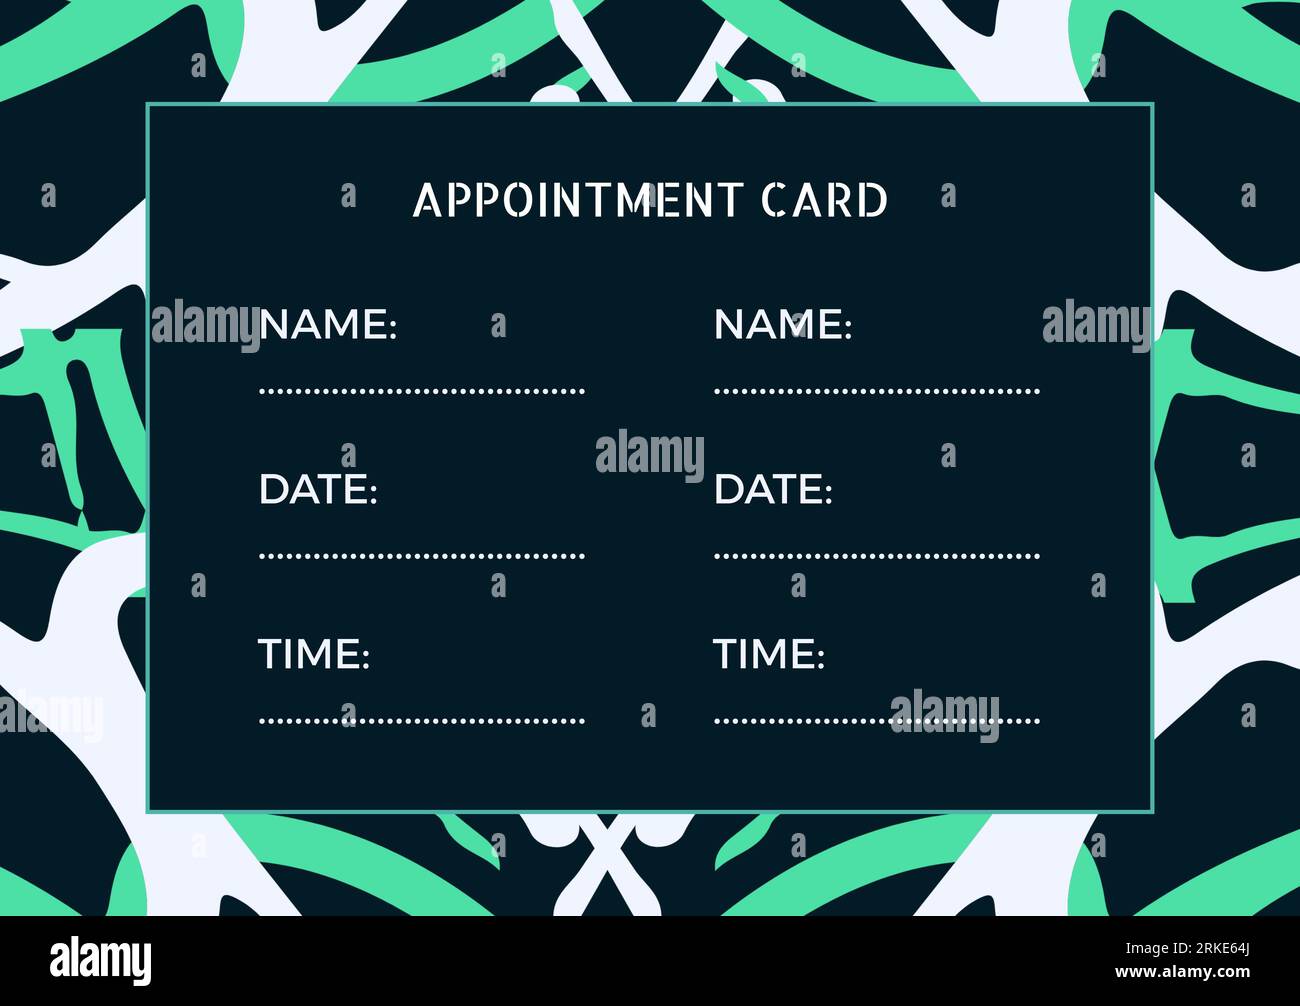 Illustration of appointment card with name, date and time text over abstract lines, copy space Stock Photo